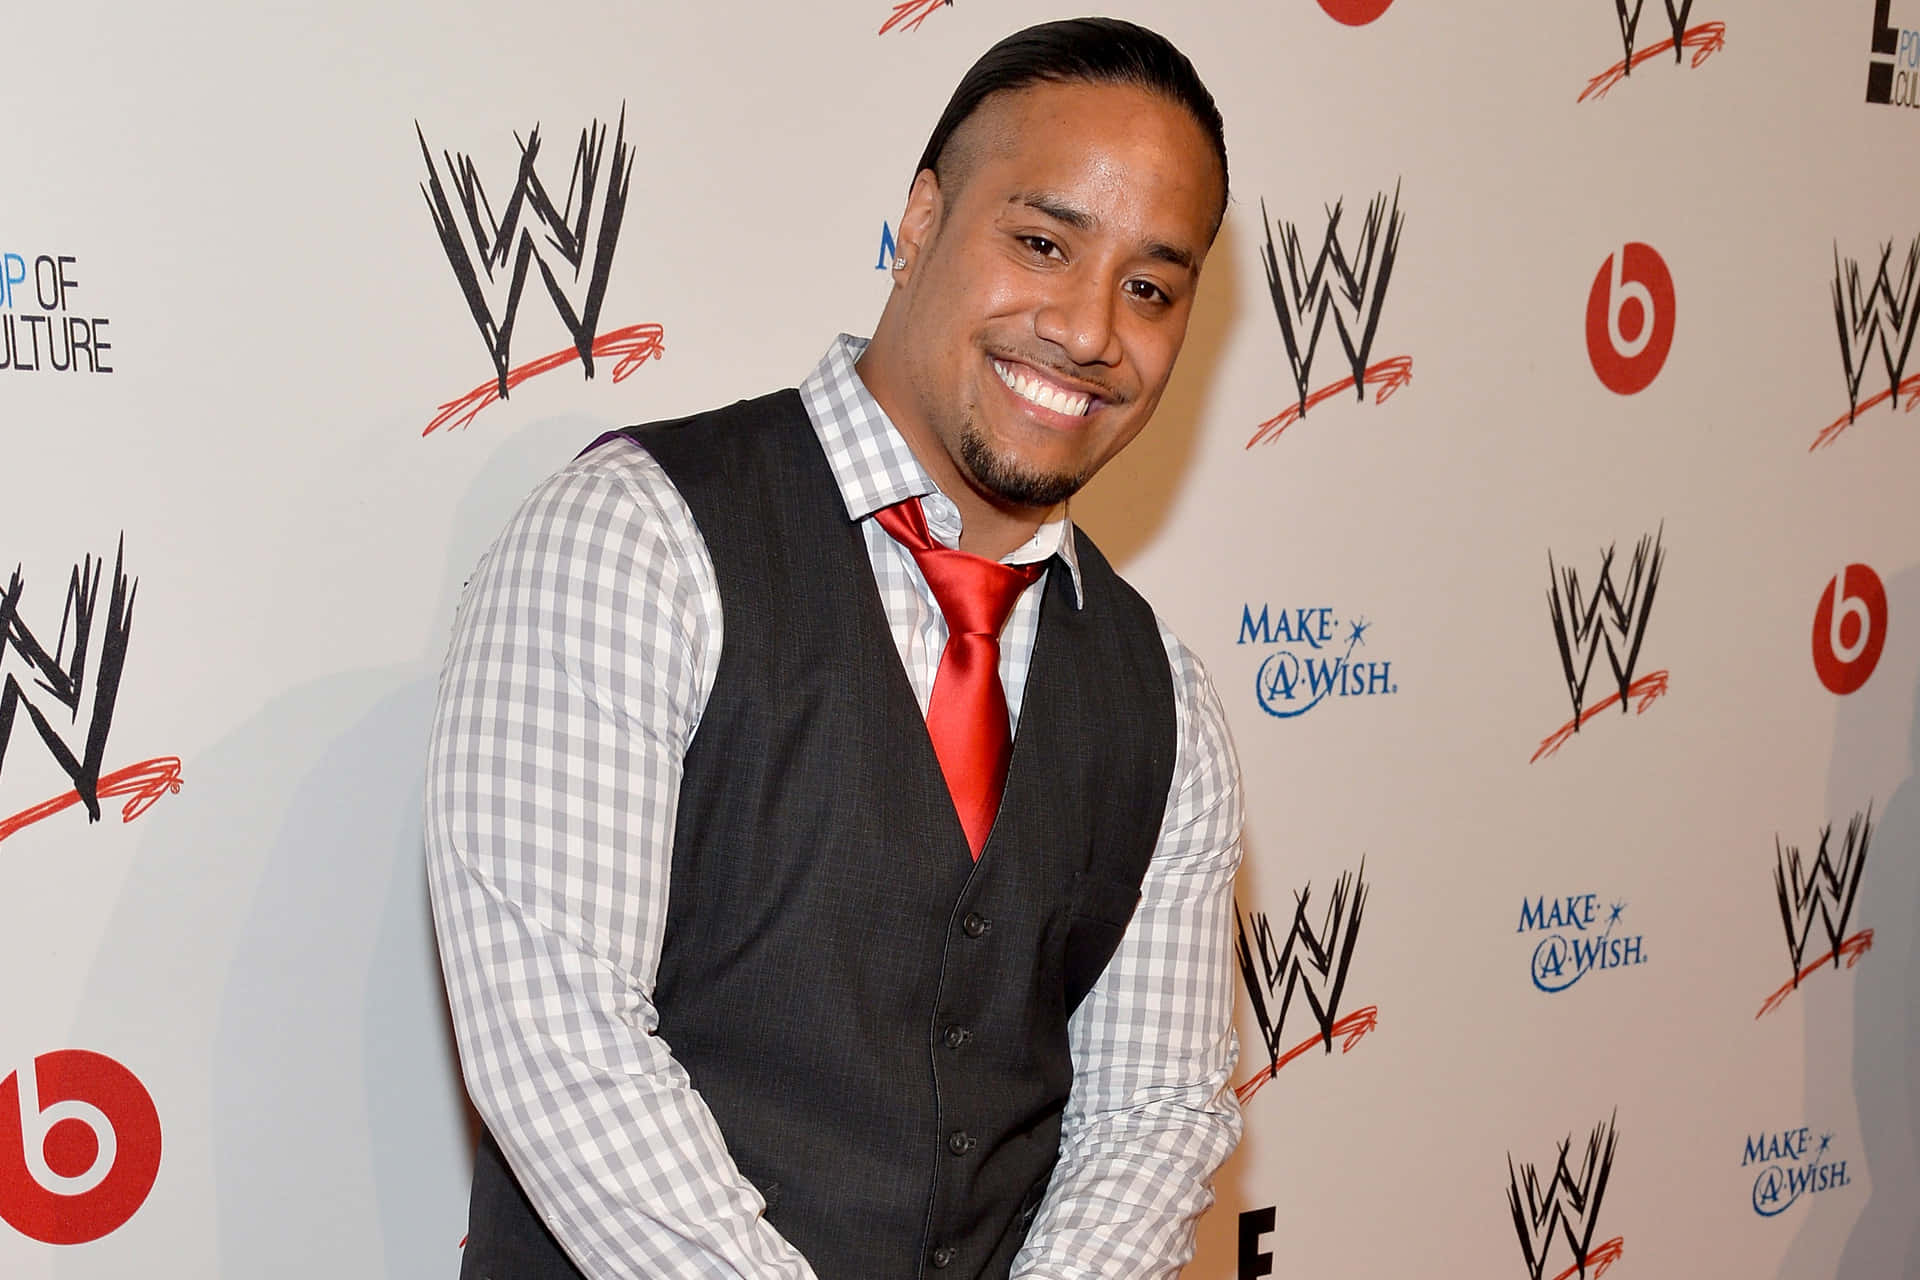 Caption: Jimmy Uso in Action at WWE Event Wallpaper